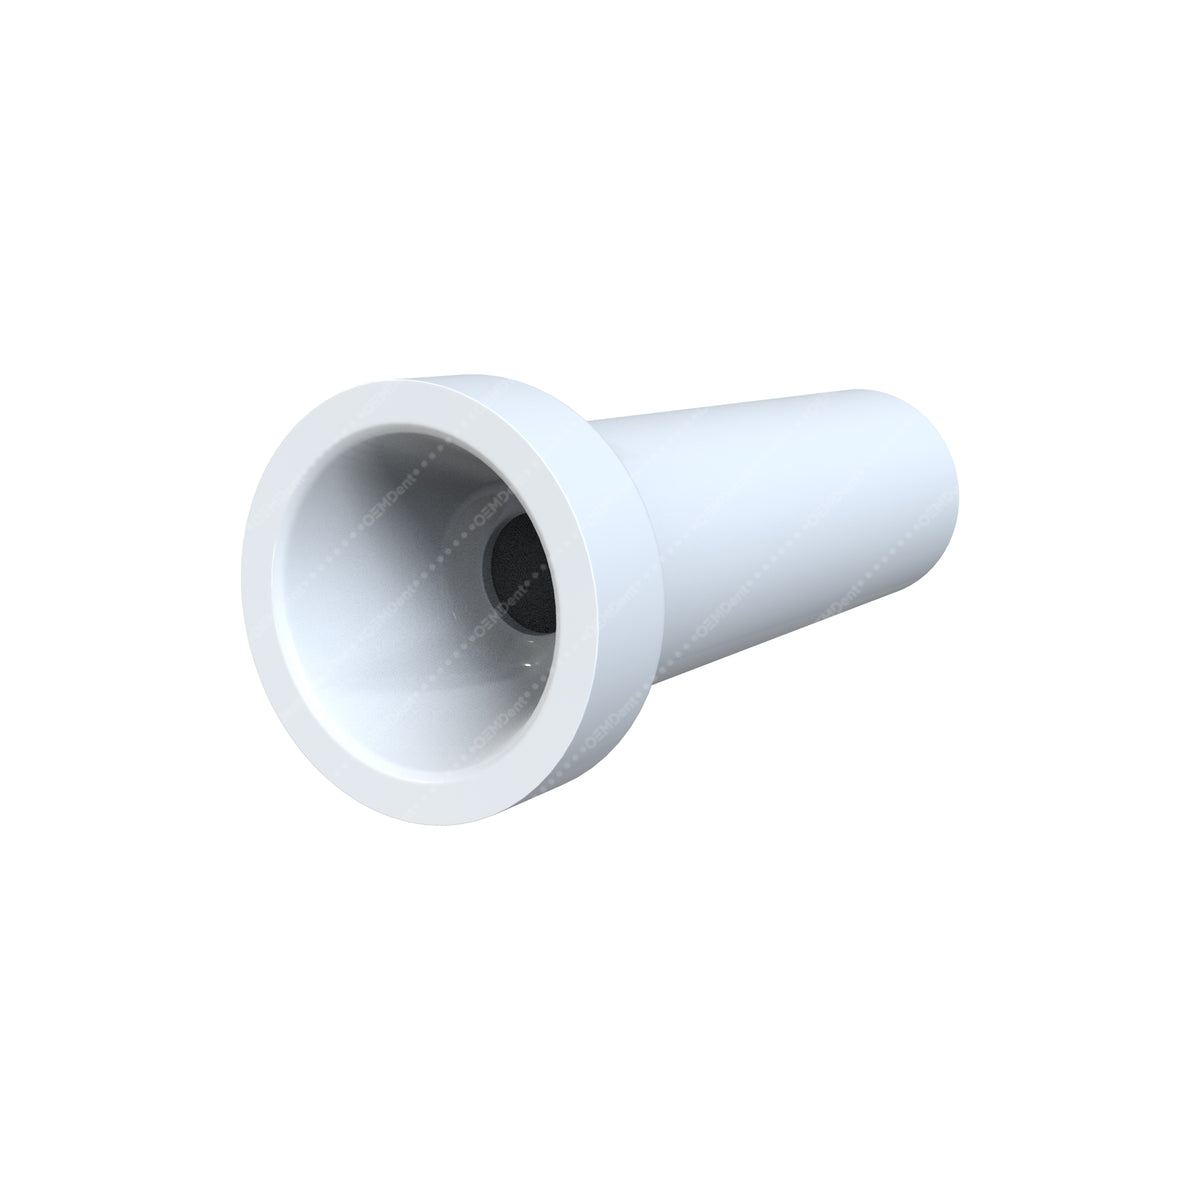 Plastic Sleeve For Multi Unit Abutment - Ritter® Internal Hex Compatible - Rear